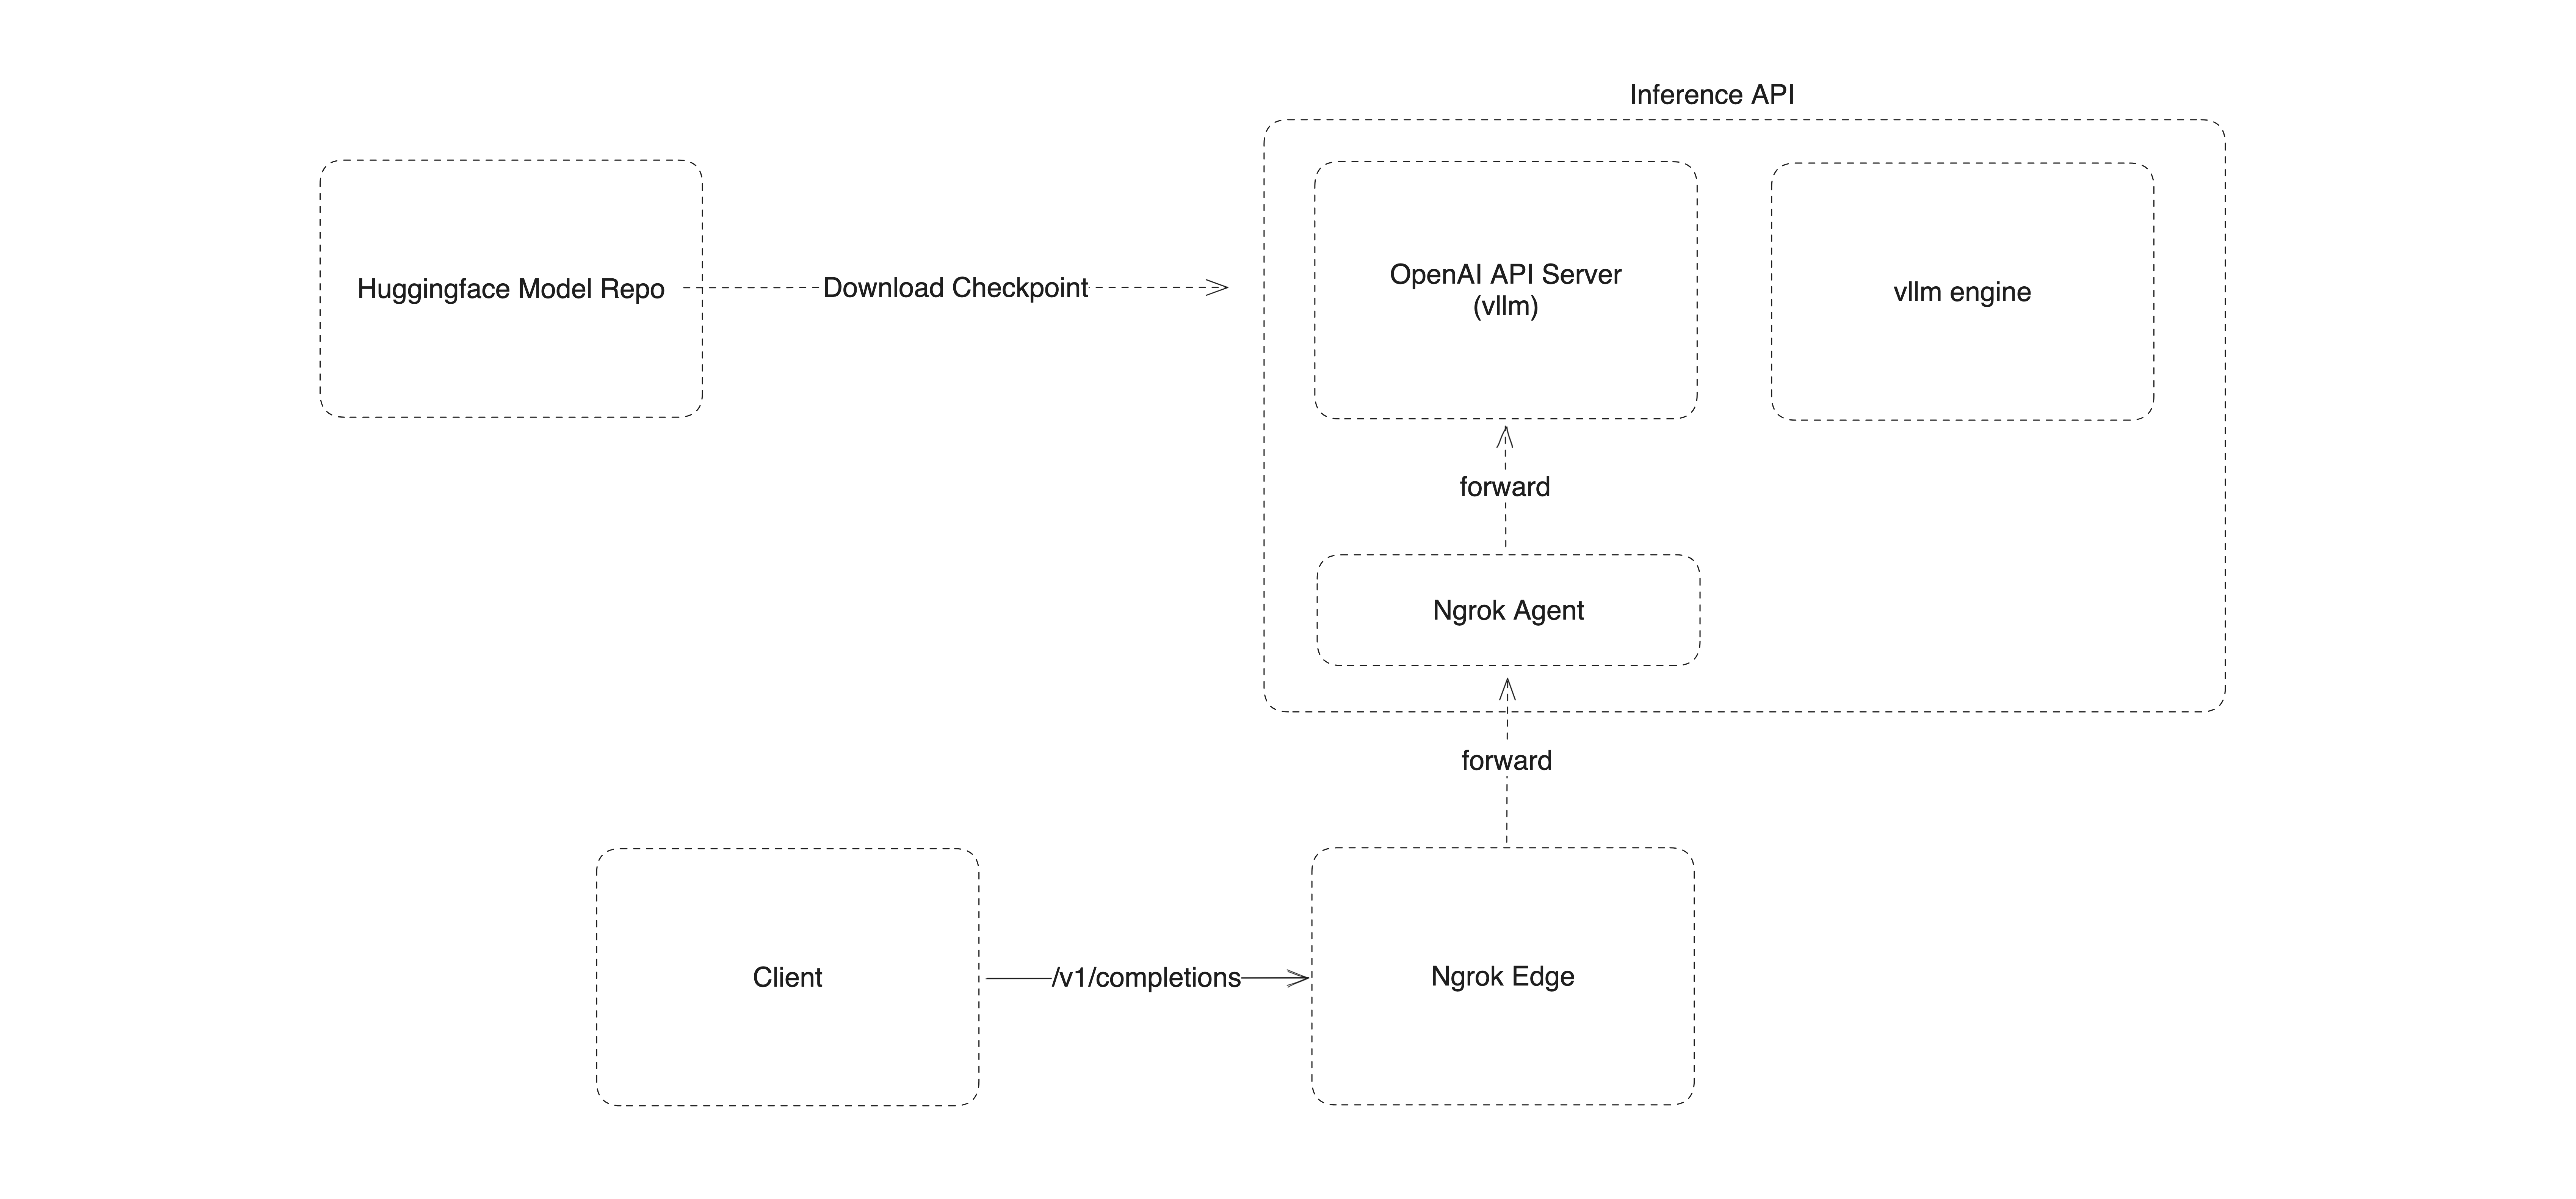 Inference API Architecture Diagram